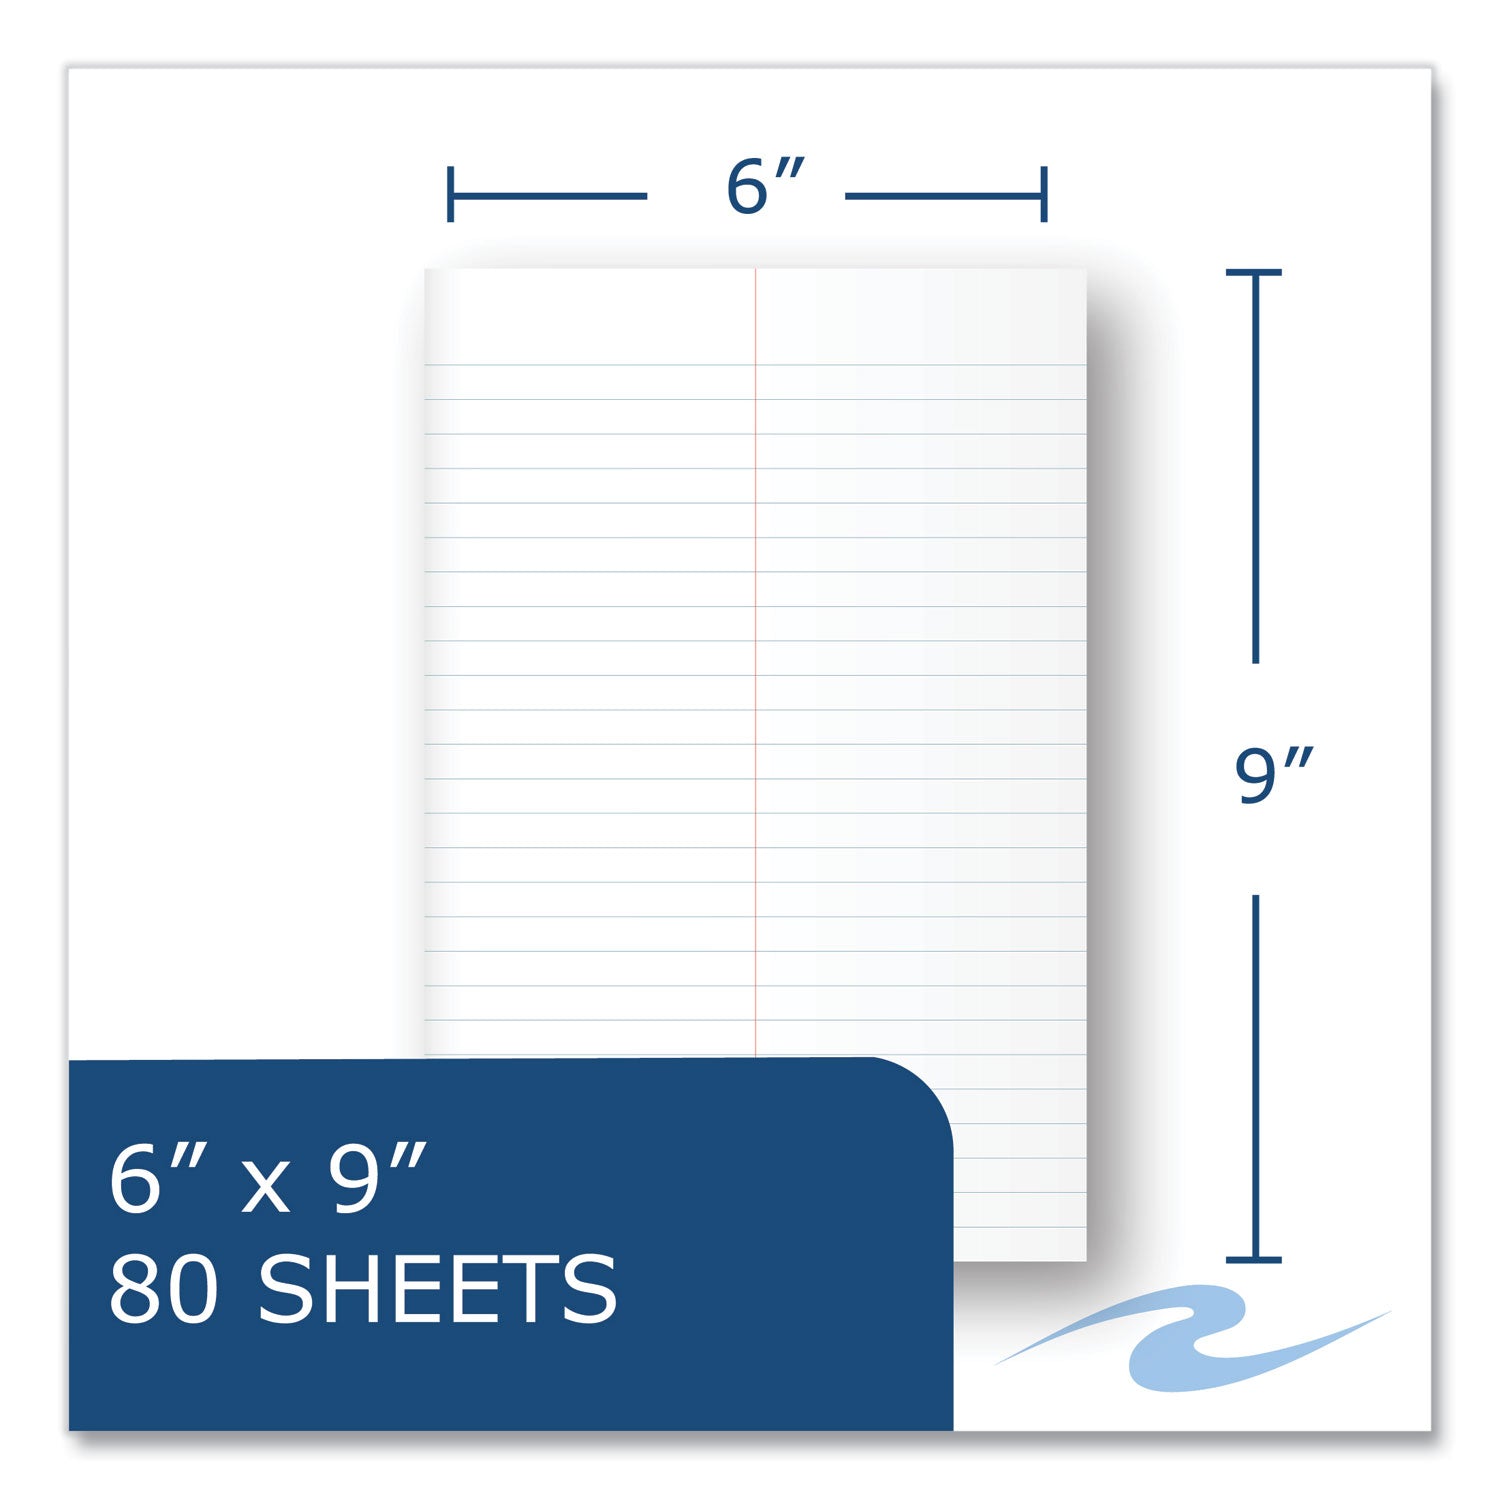 boardroom-series-steno-pad-gregg-rule-brown-cover-80-white-6-x-9-sheets-72-pads-carton-ships-in-4-6-business-days_roa12102cs - 7